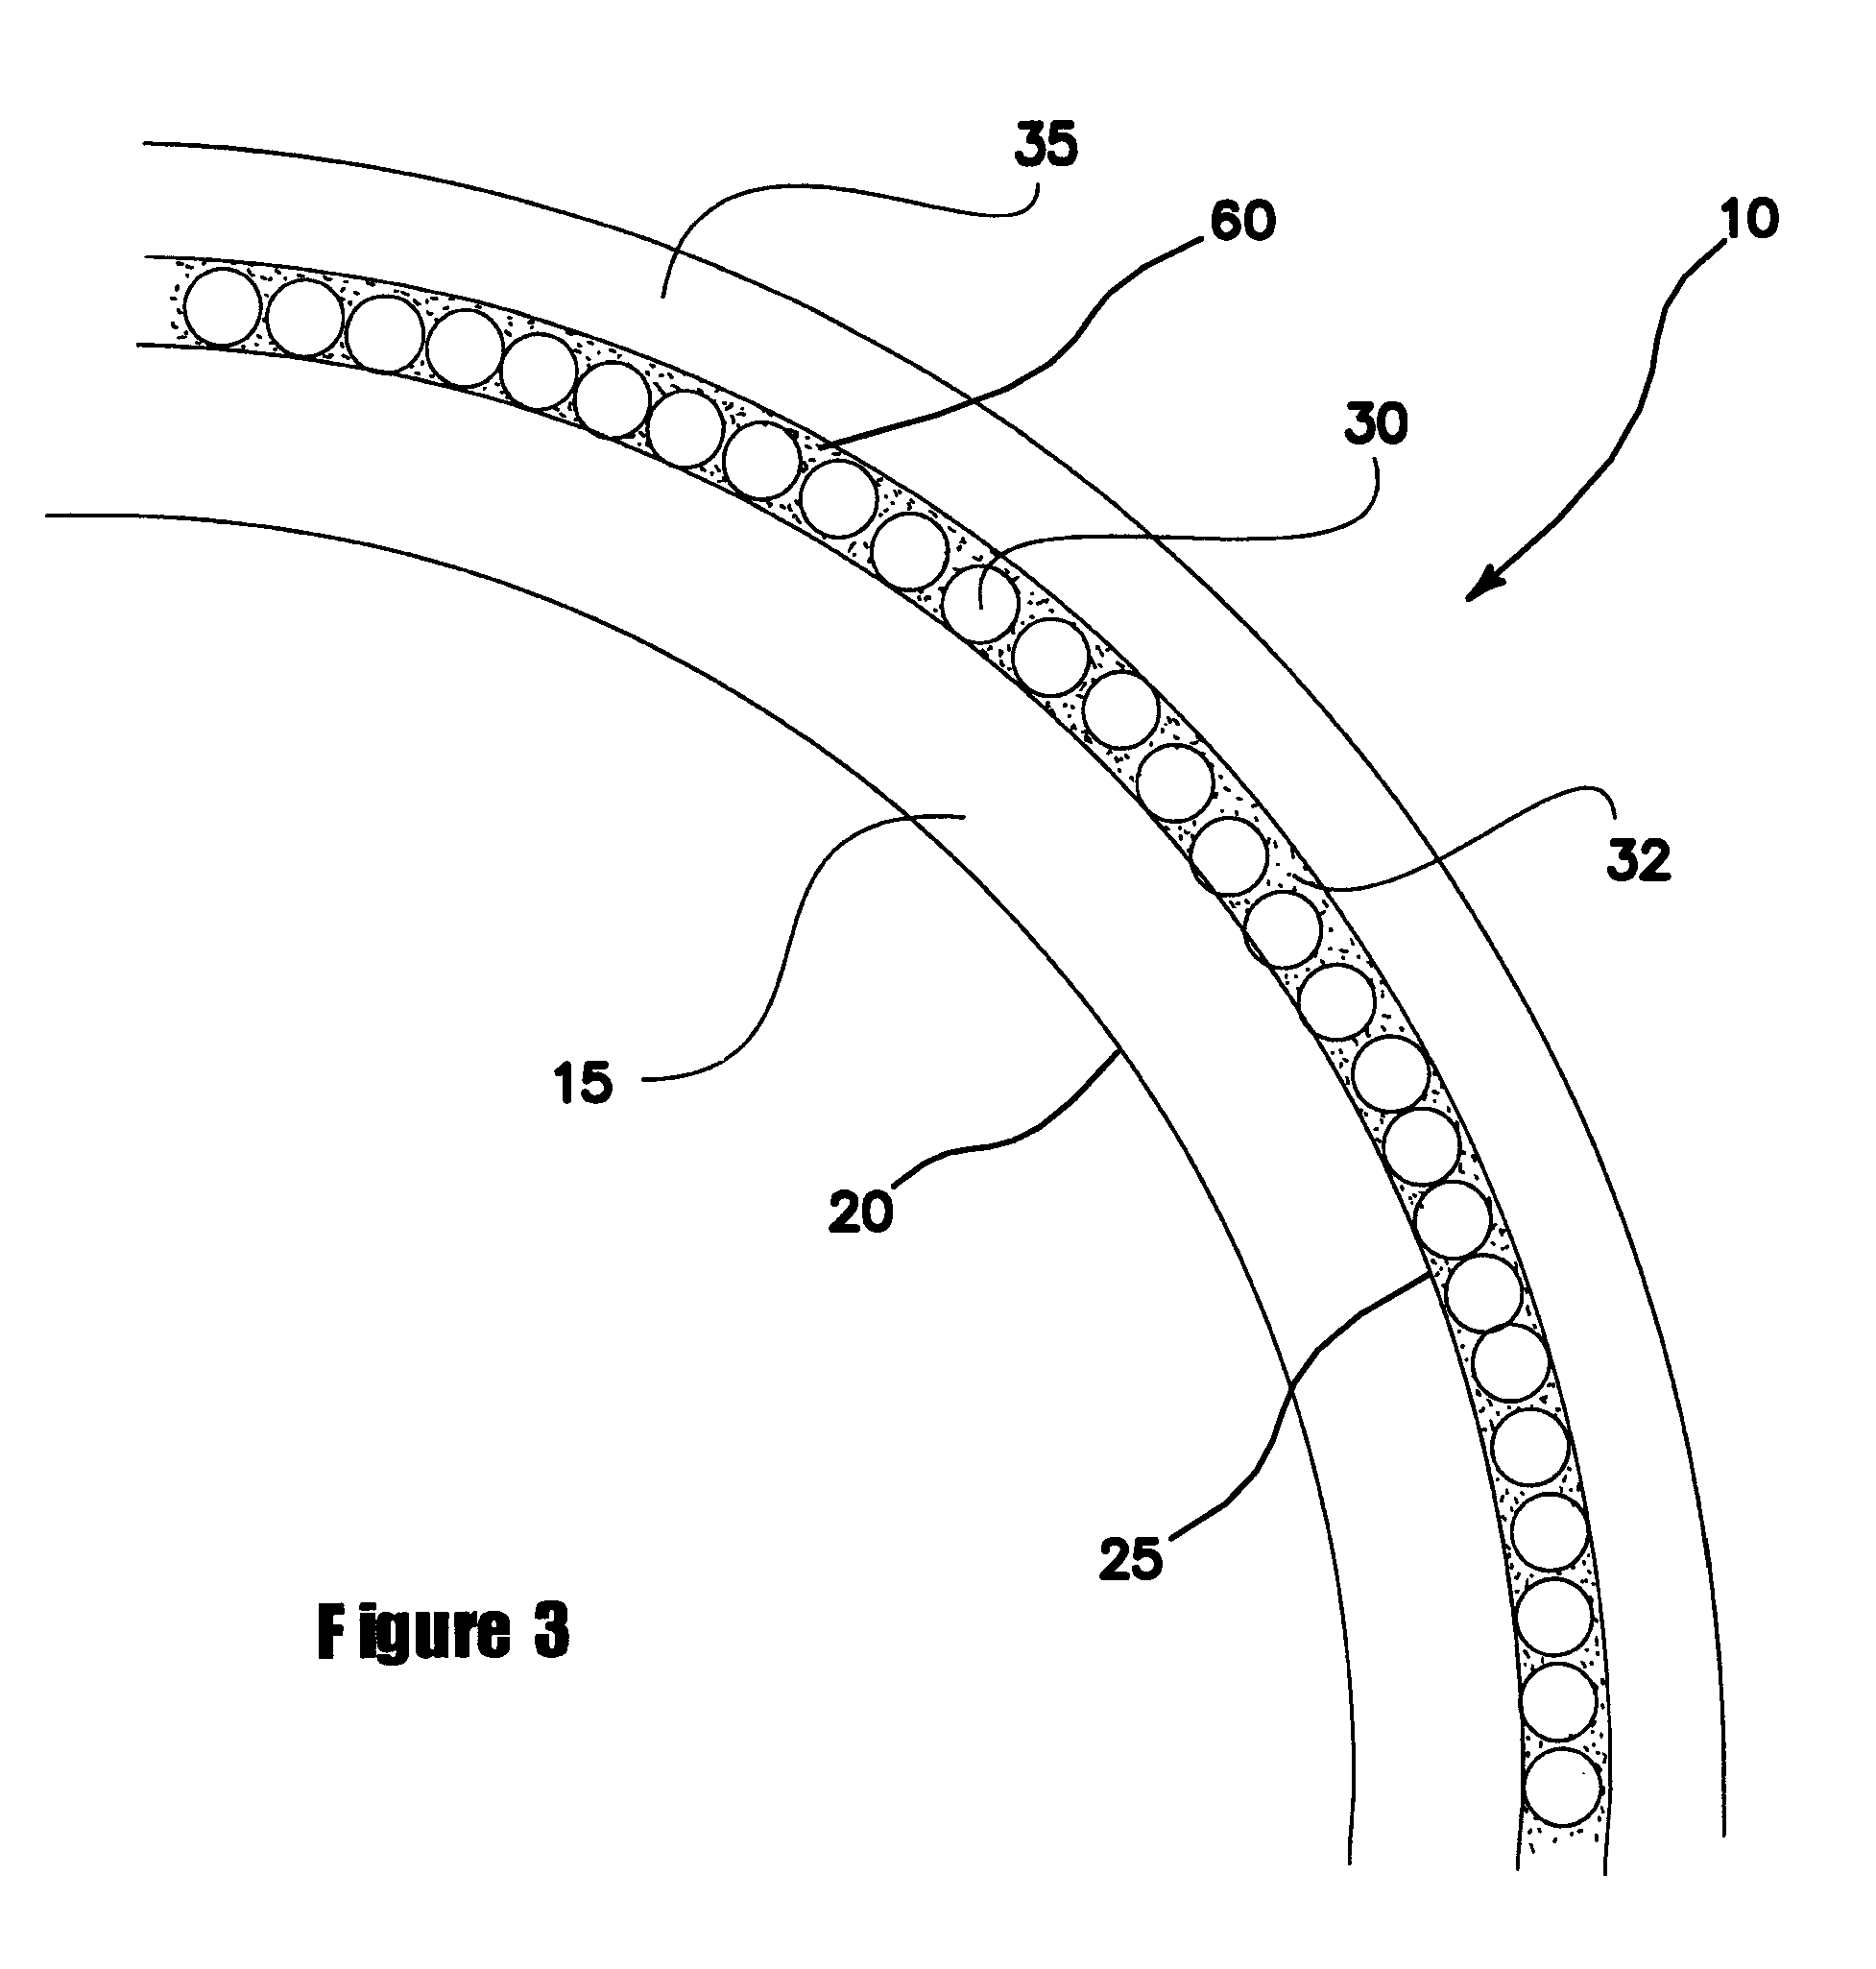 Reinforced flexible hose with leakage indicator and method of making same